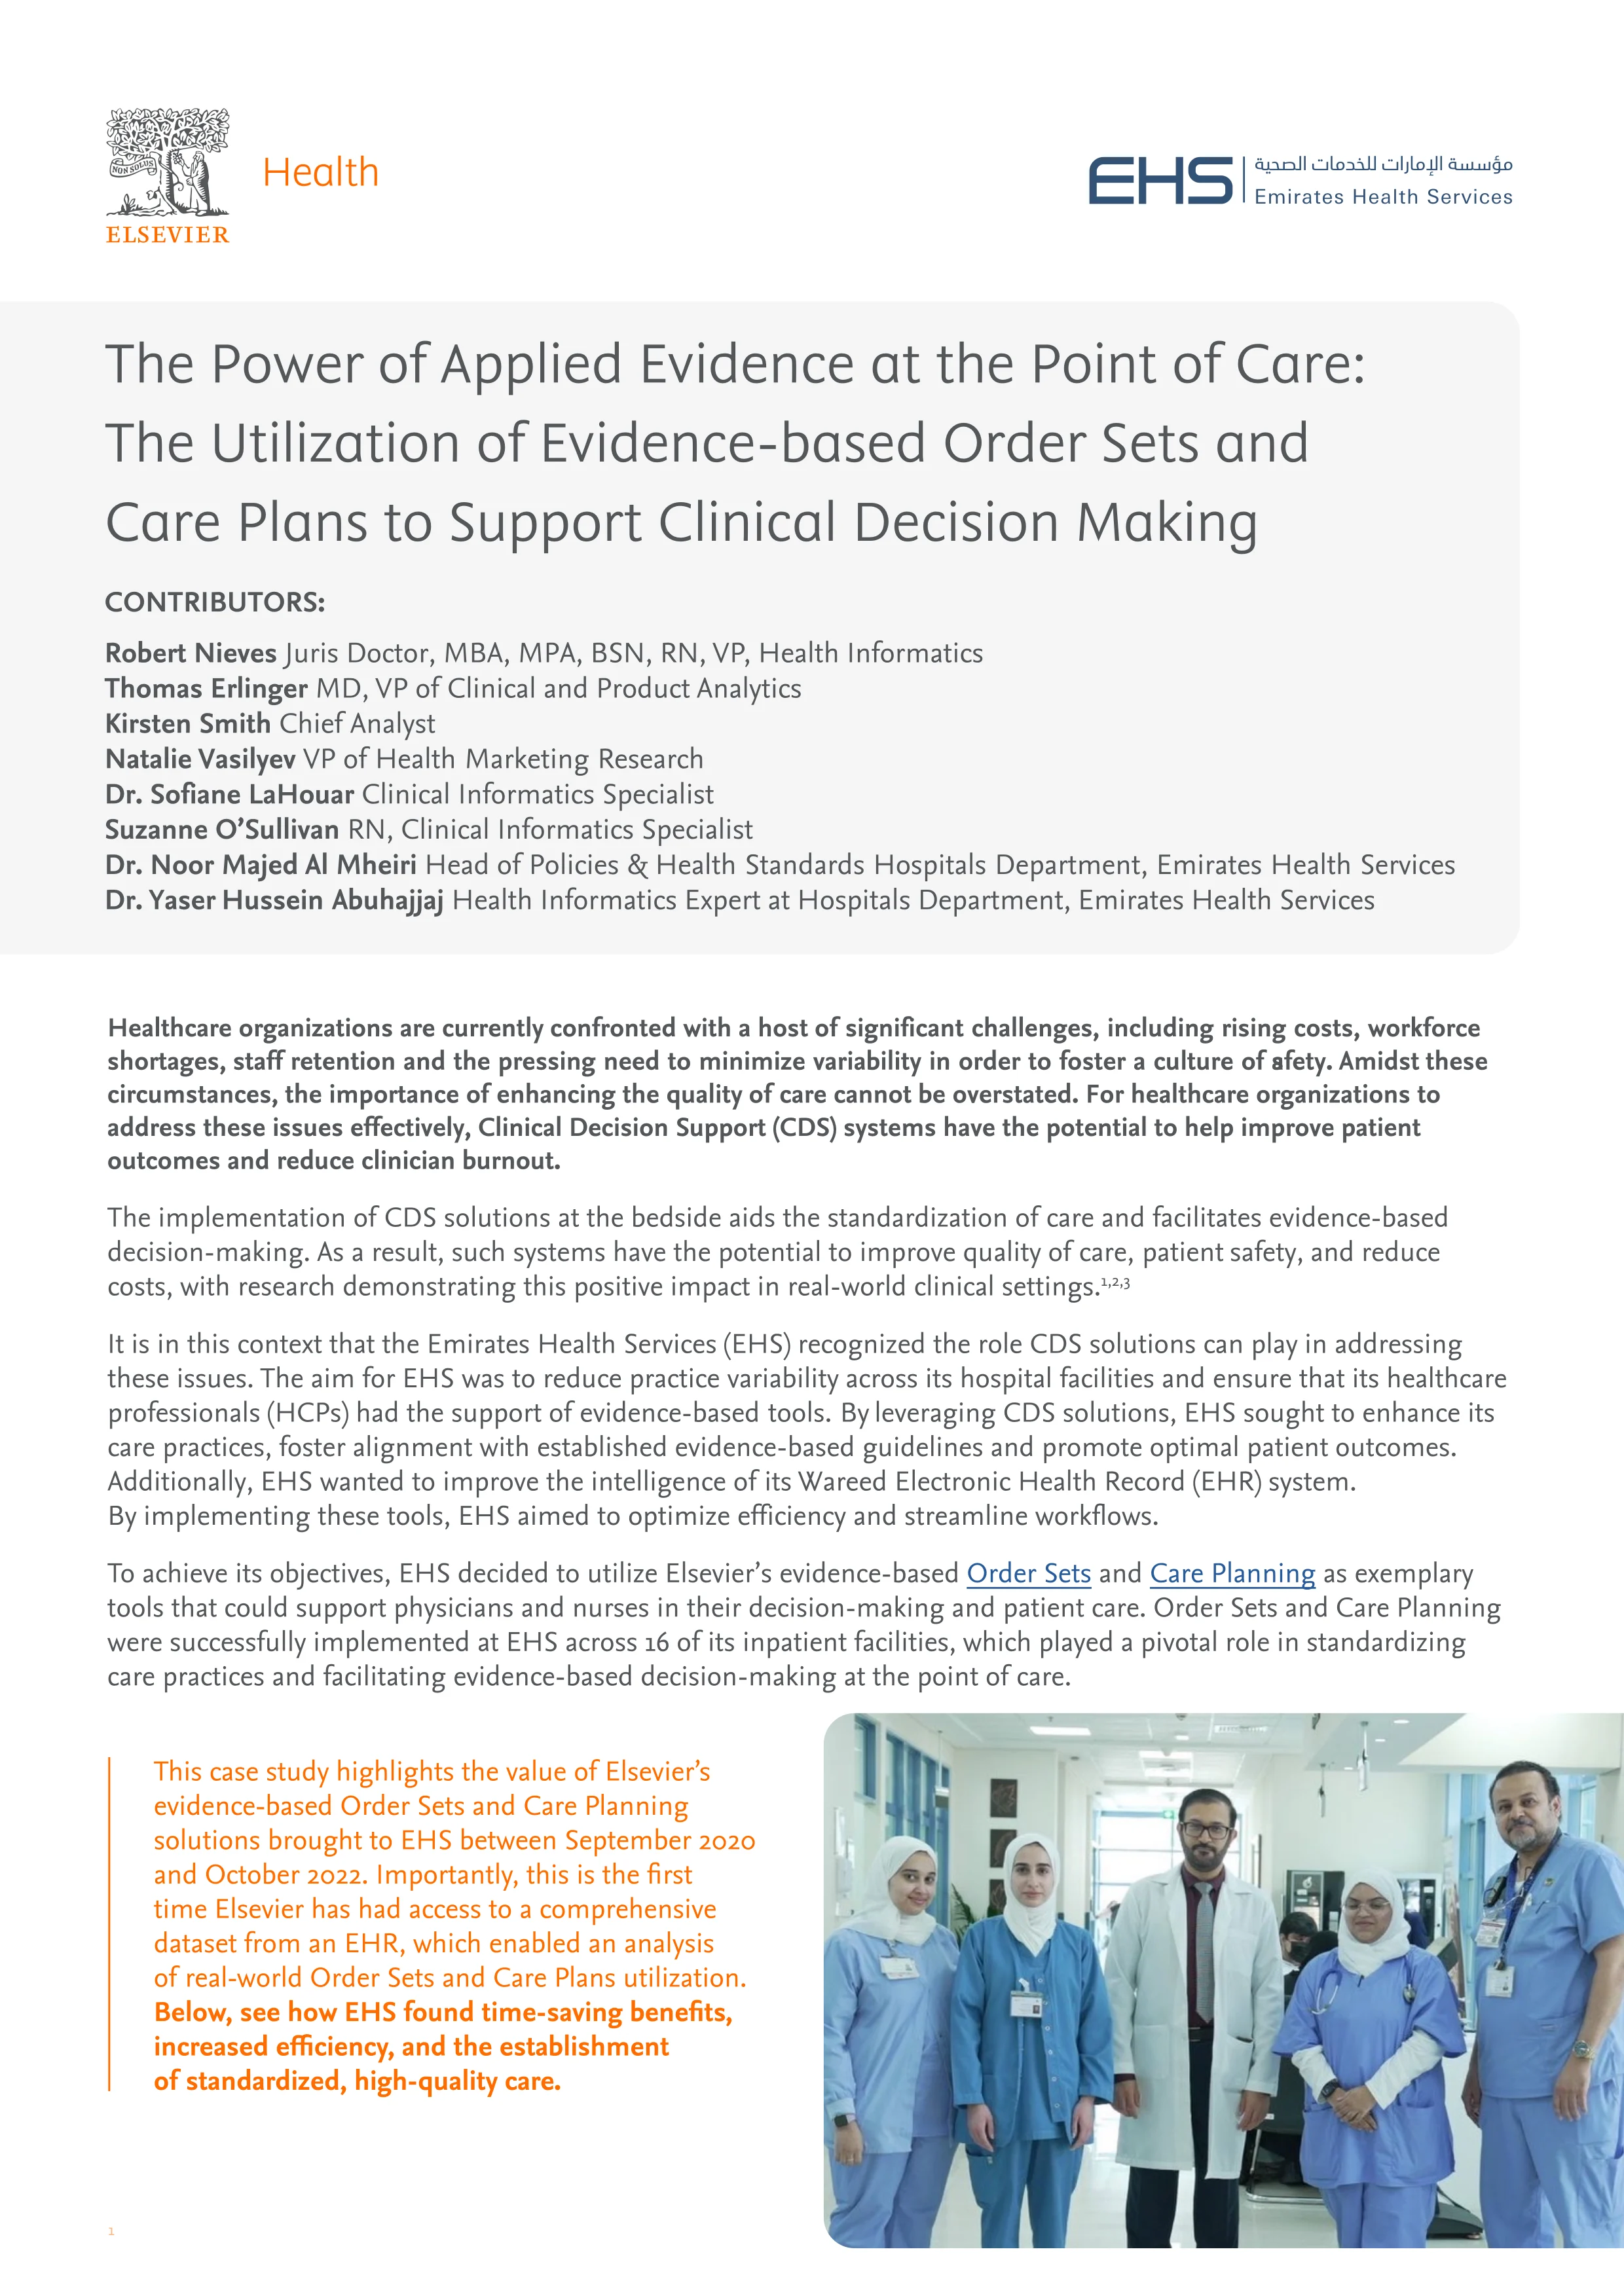 The Utilization of Evidence-based Order Sets and Care Plans to Support Clinical Decision Making